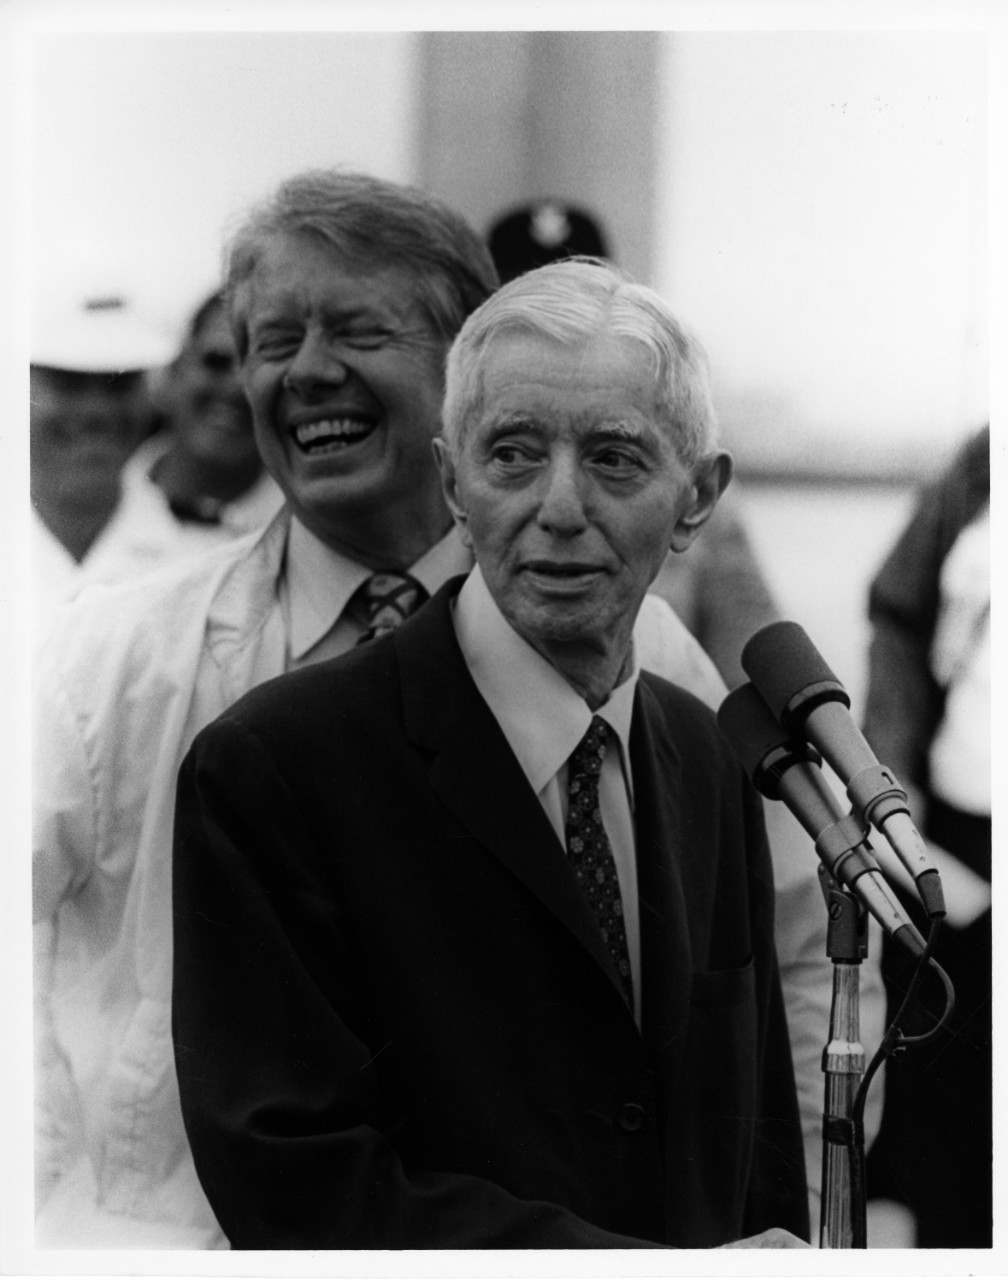 black and white photograph of a man at a microphone with another man laughing behind him